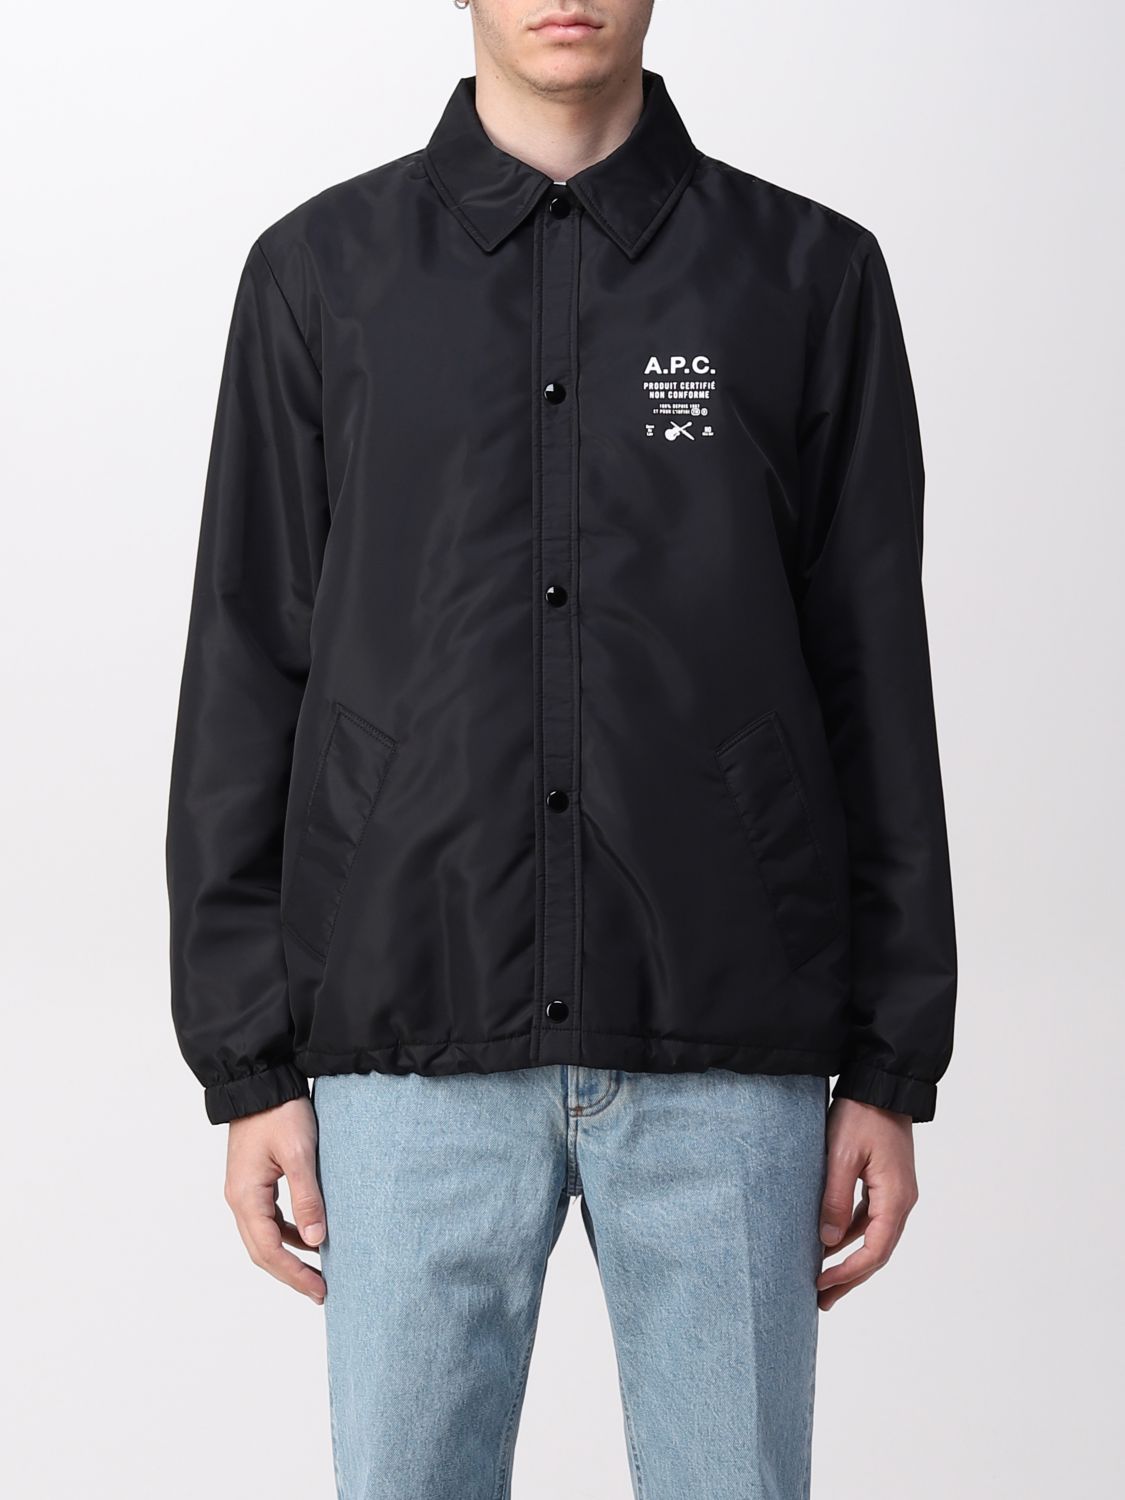 A.P.C.: jacket for man - Black | A.p.c. jacket PAAESH02705 online on ...